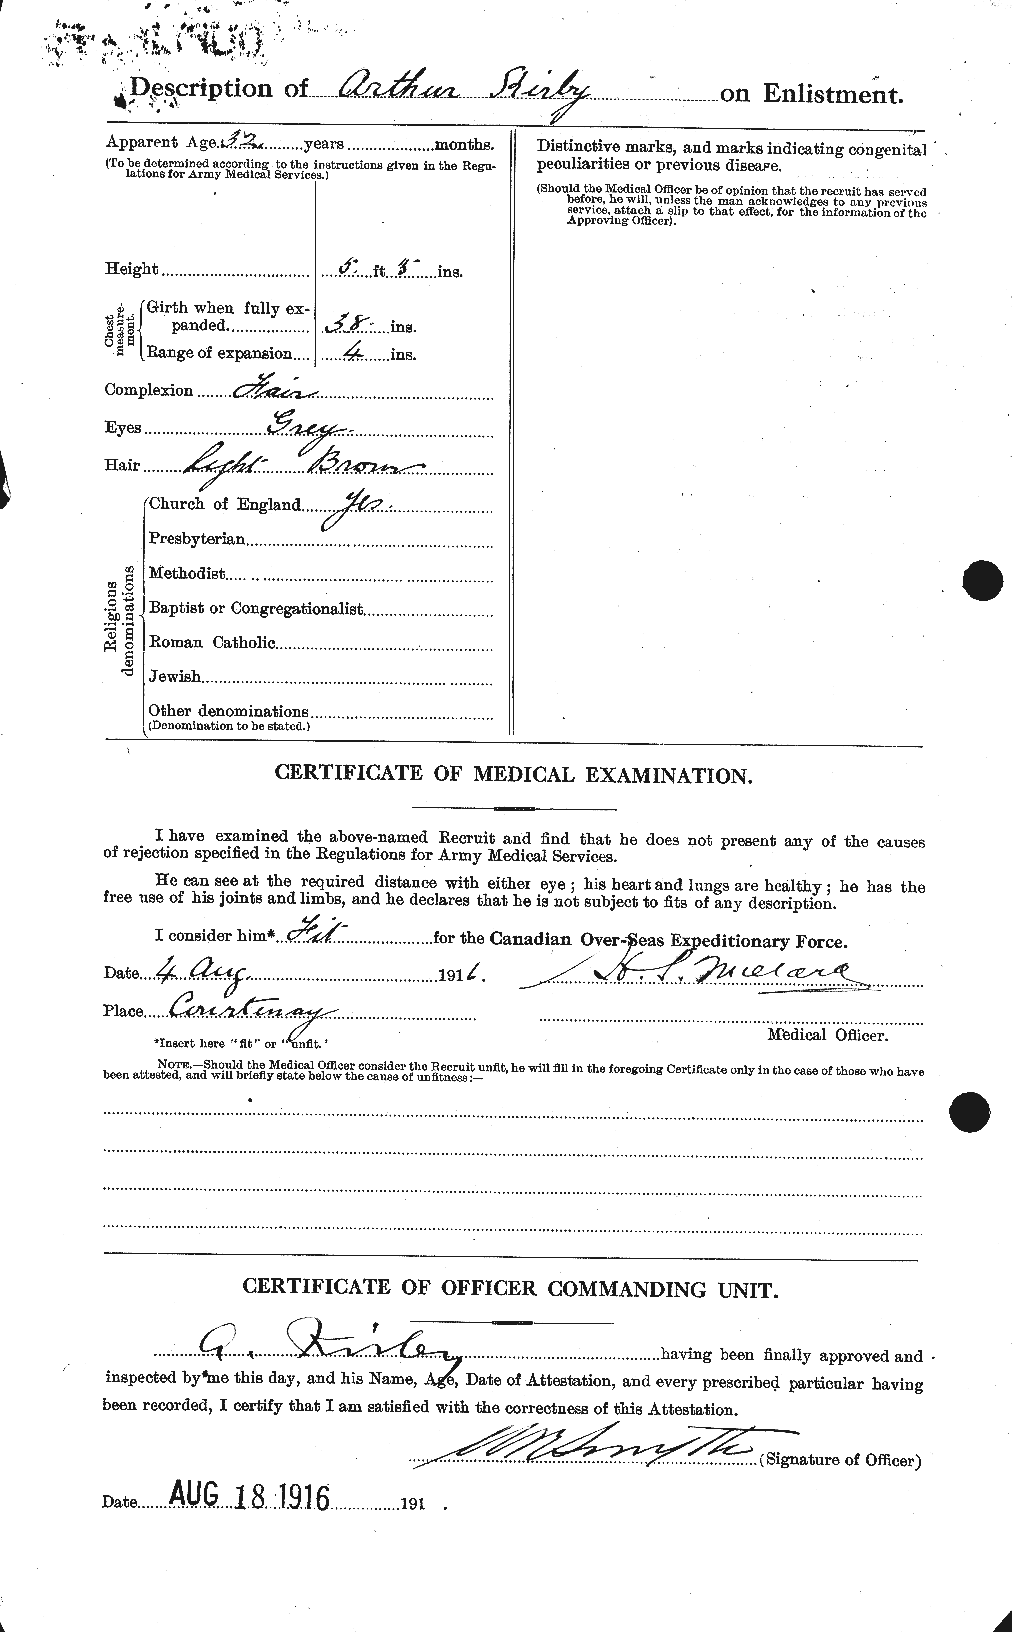 Personnel Records of the First World War - CEF 437153b